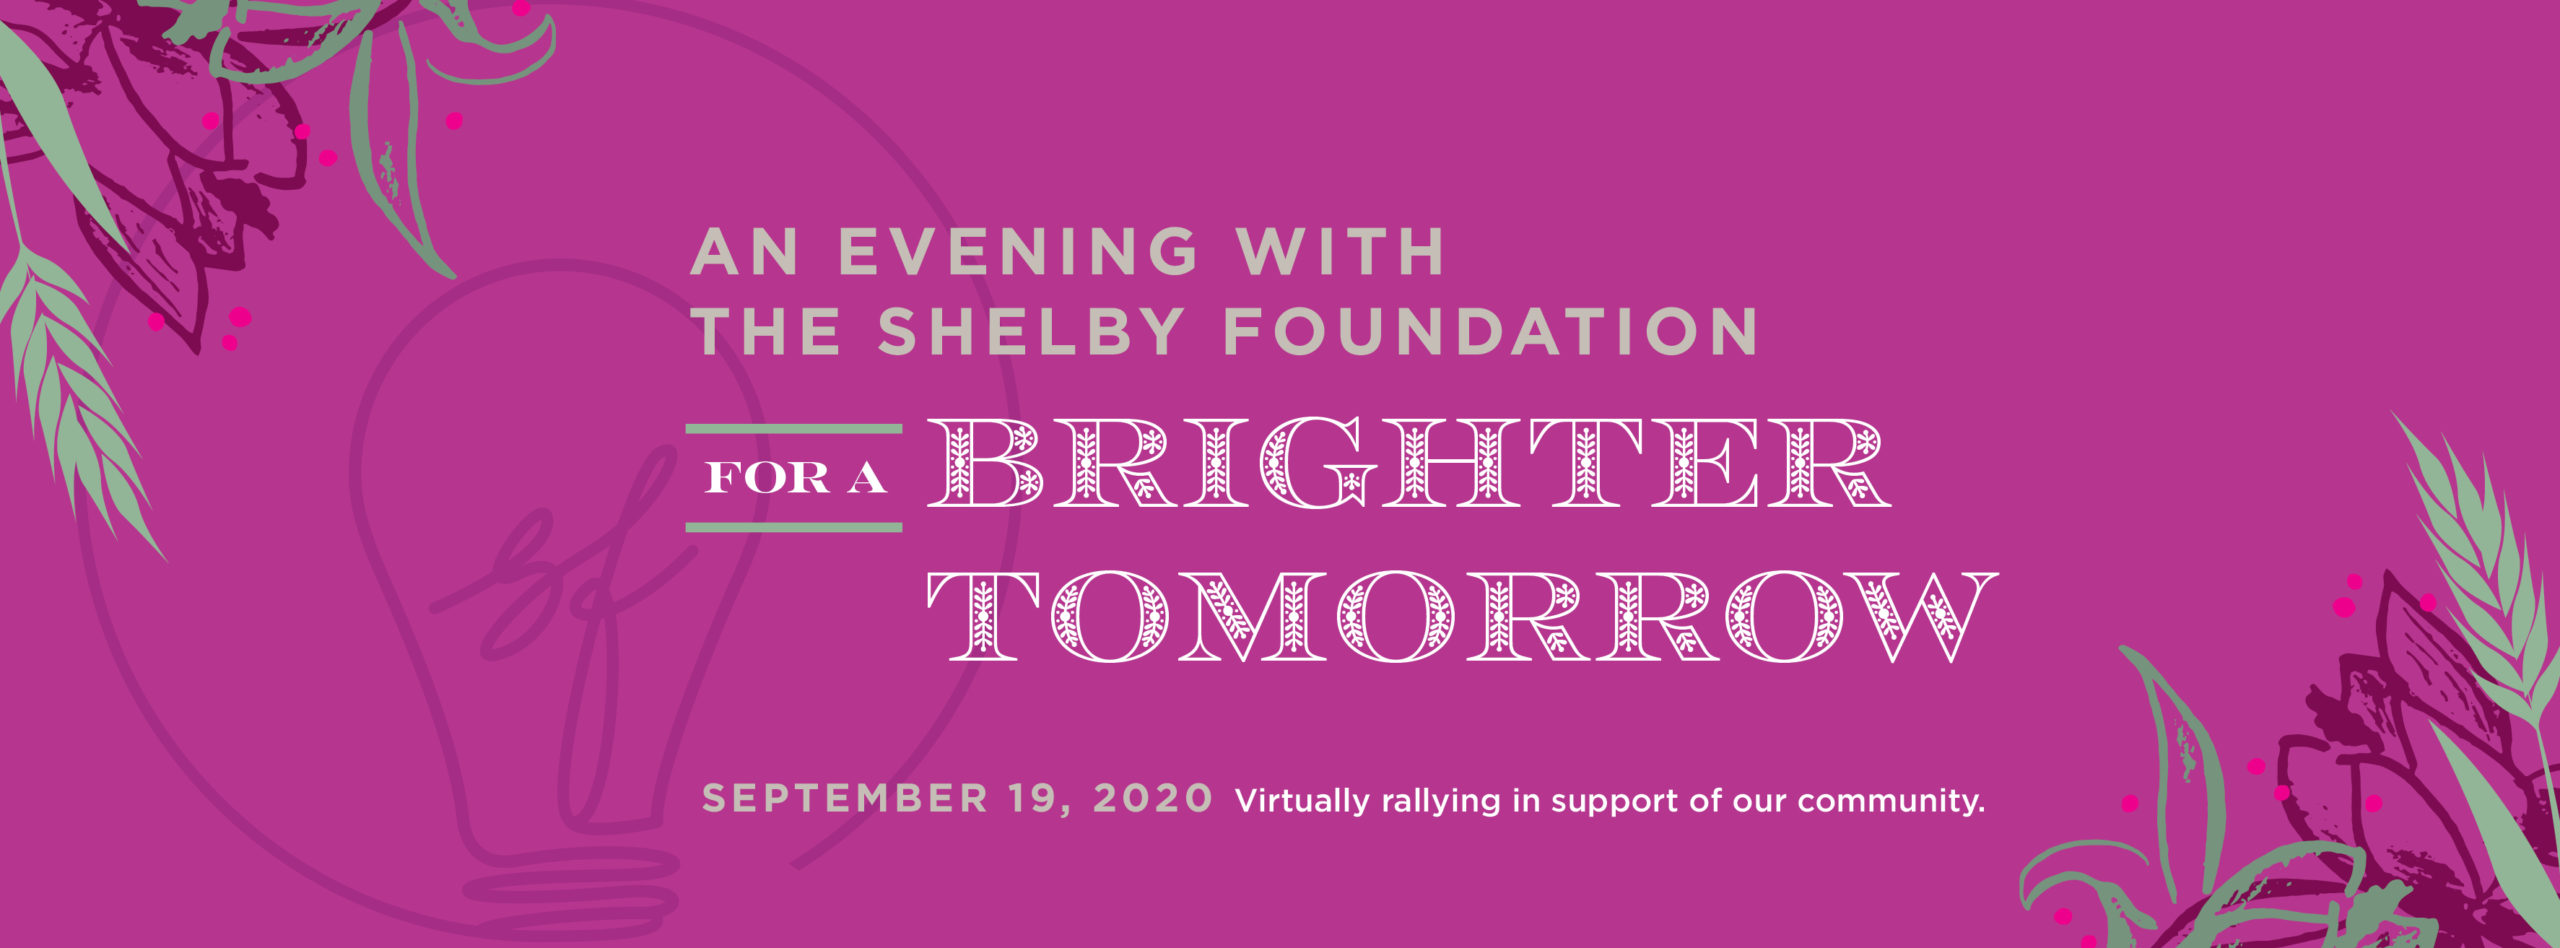 The Shelby Foundation Annual Fundraiser 2020